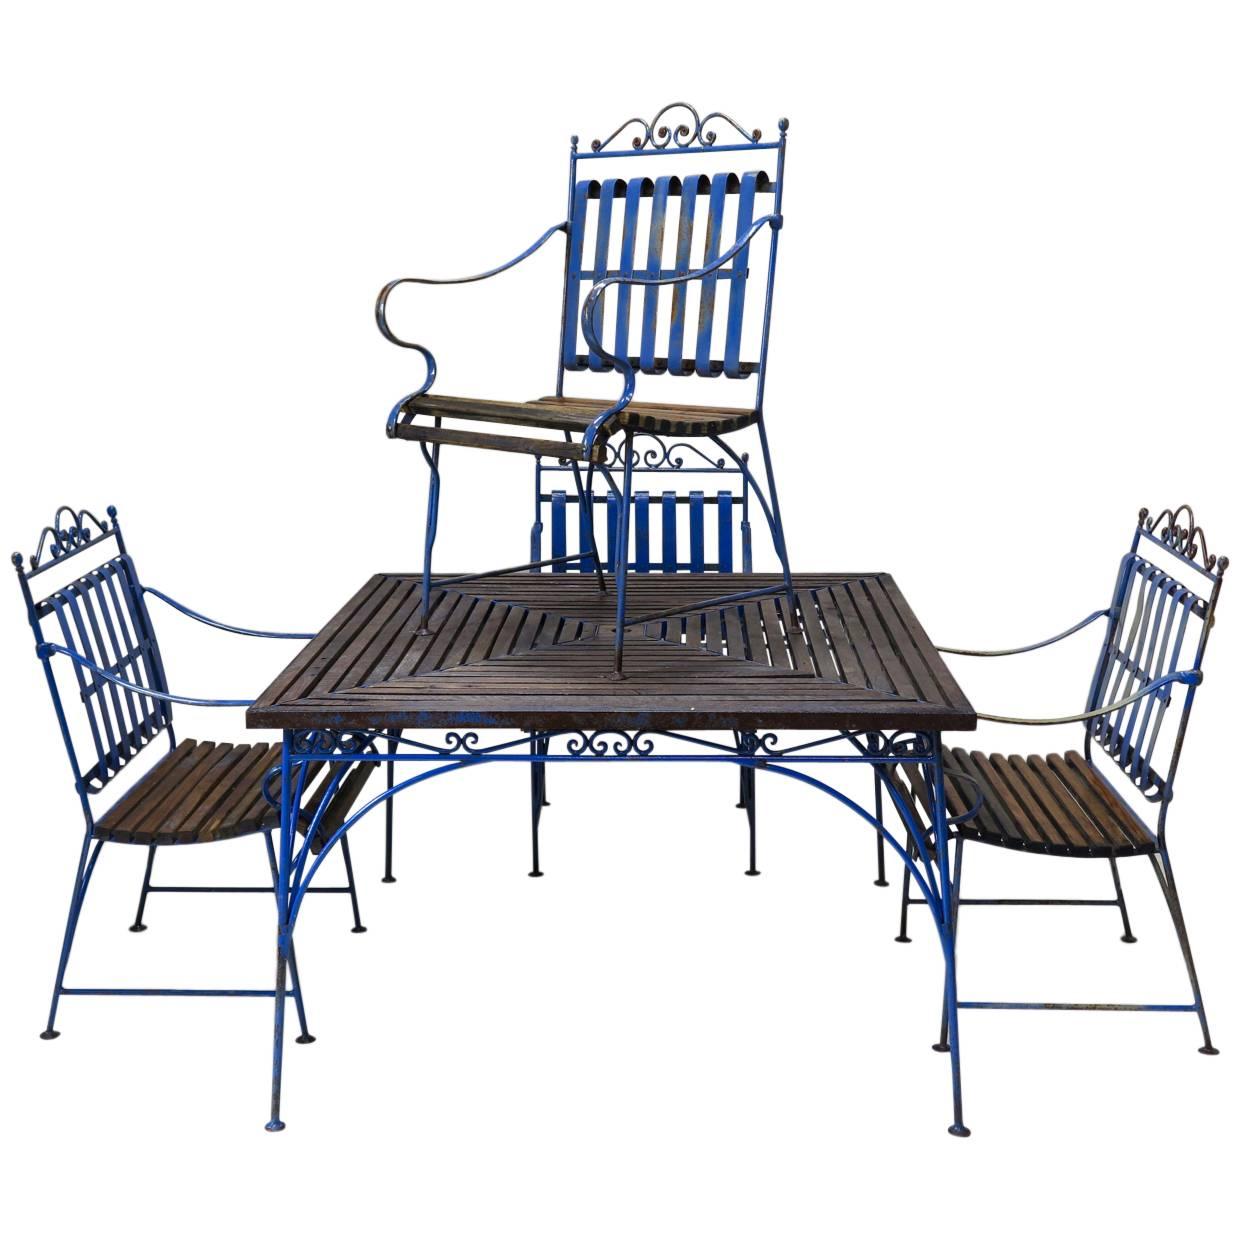 Lovely French 1930s Wrought Iron and Wood Garden Table with Four Armchairs For Sale